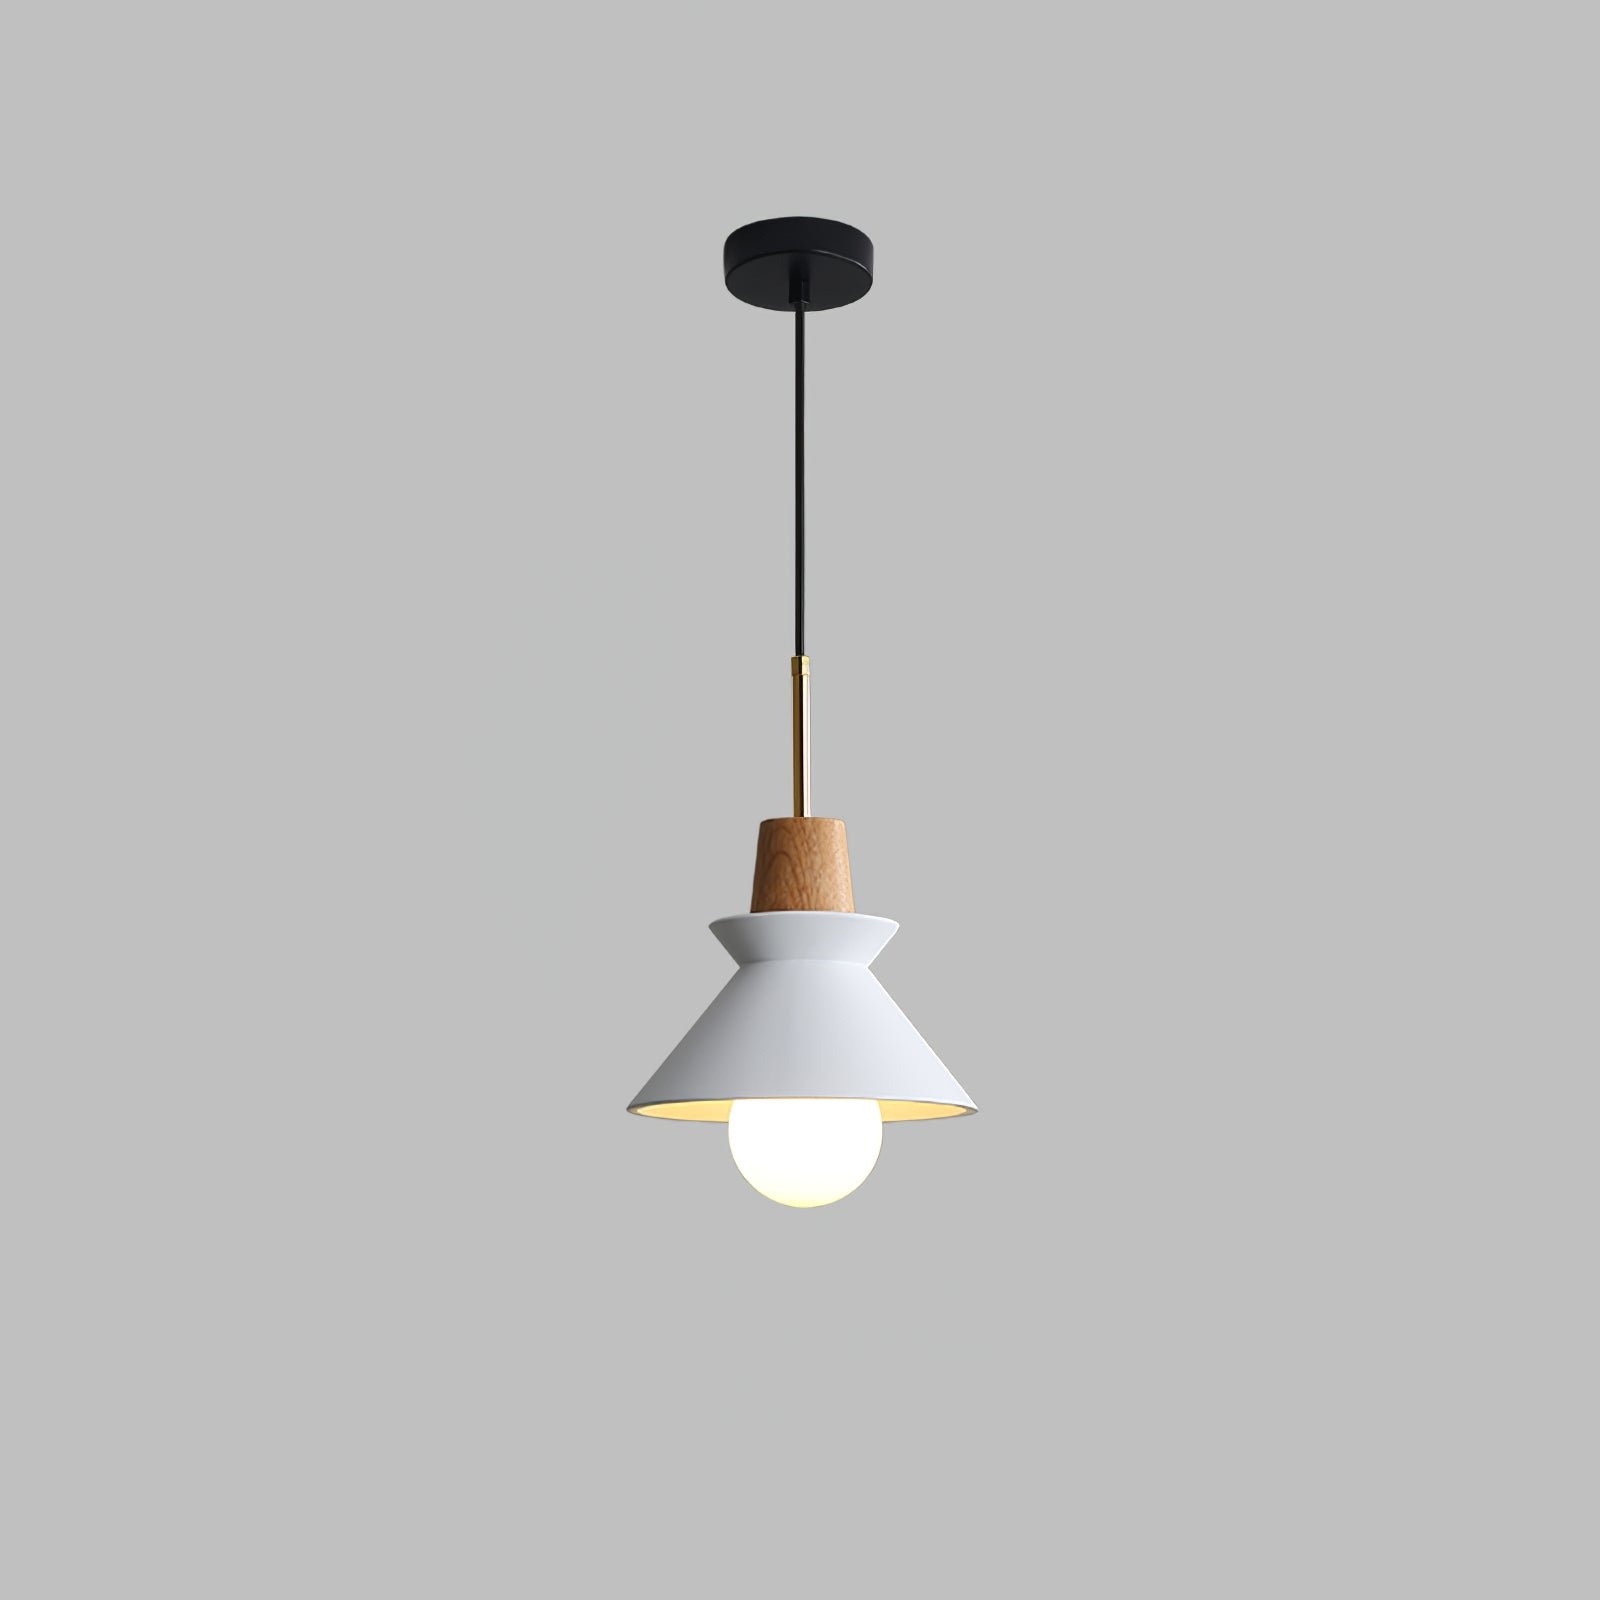 White Space Pendant Lamp, measuring 8.6 inches in diameter and 12.9 inches in height (22cm x 33cm)